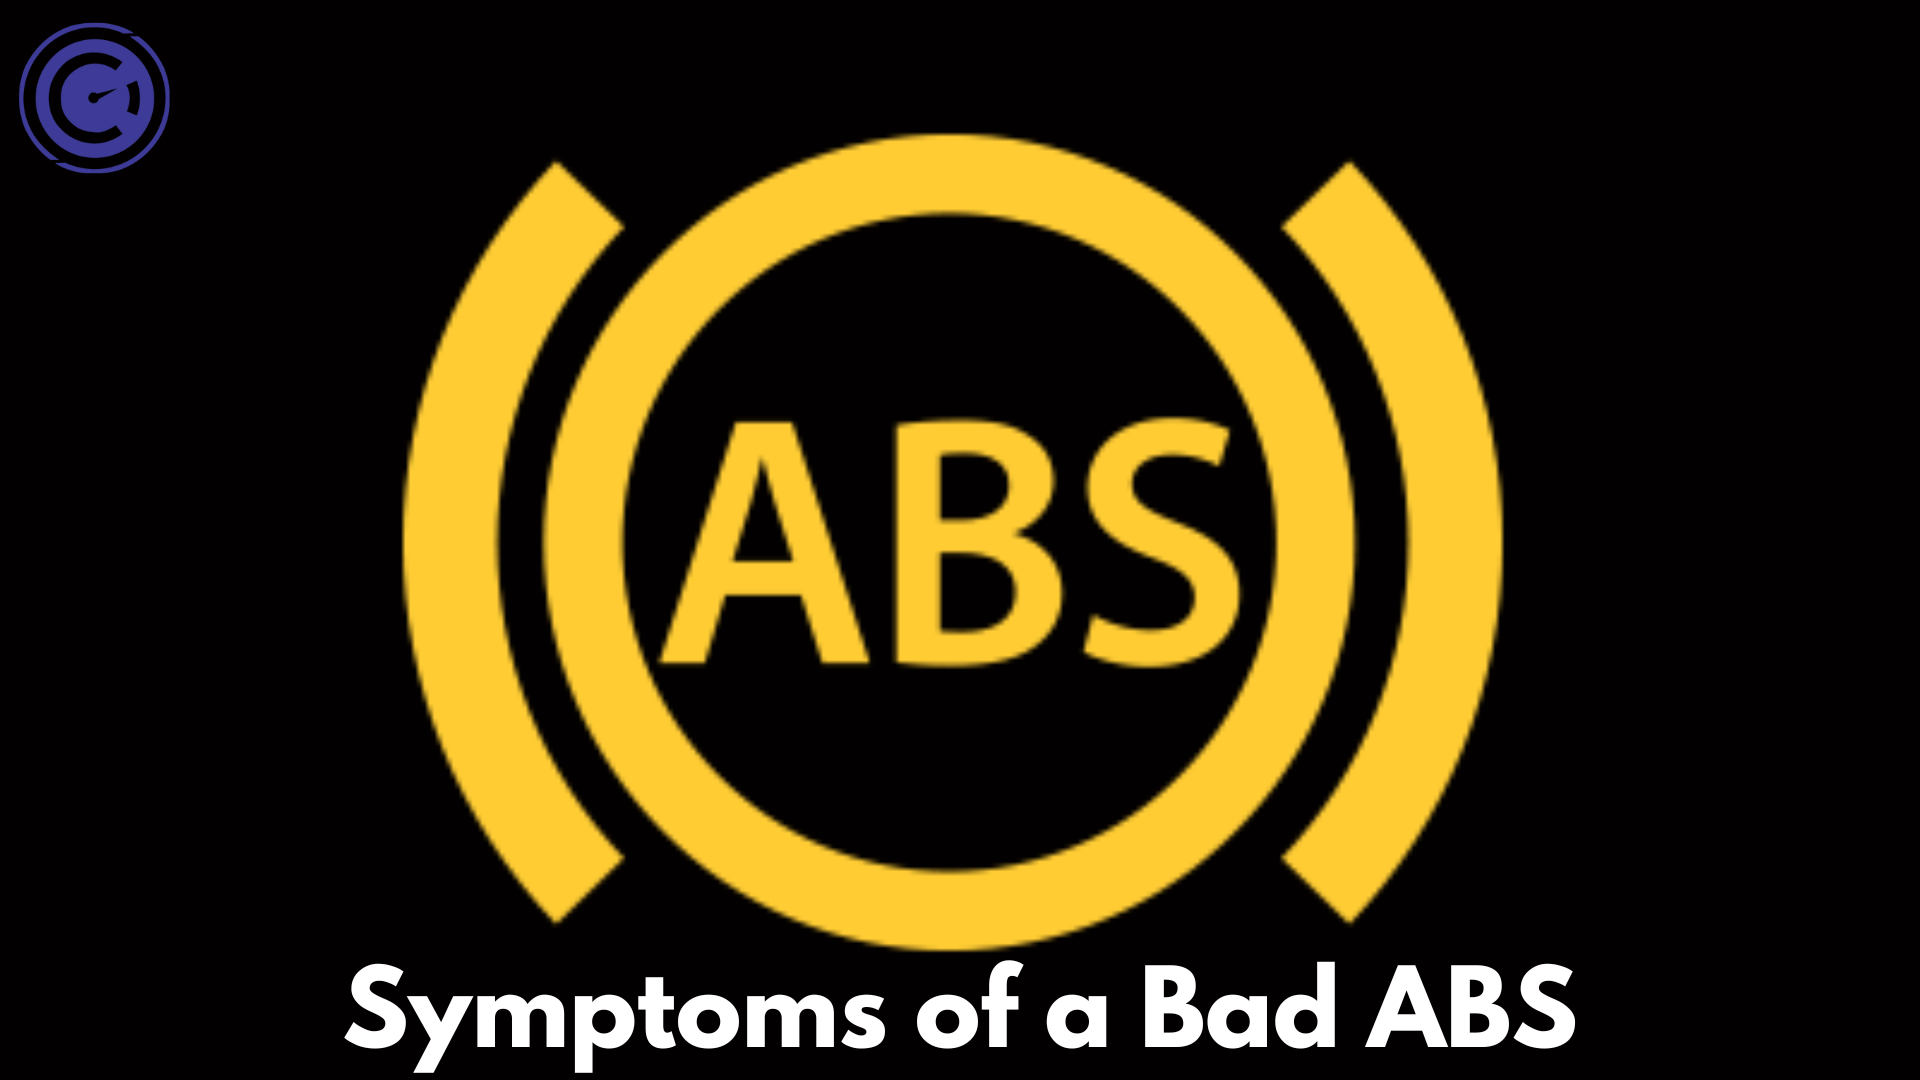 Symptoms of a Bad ABS